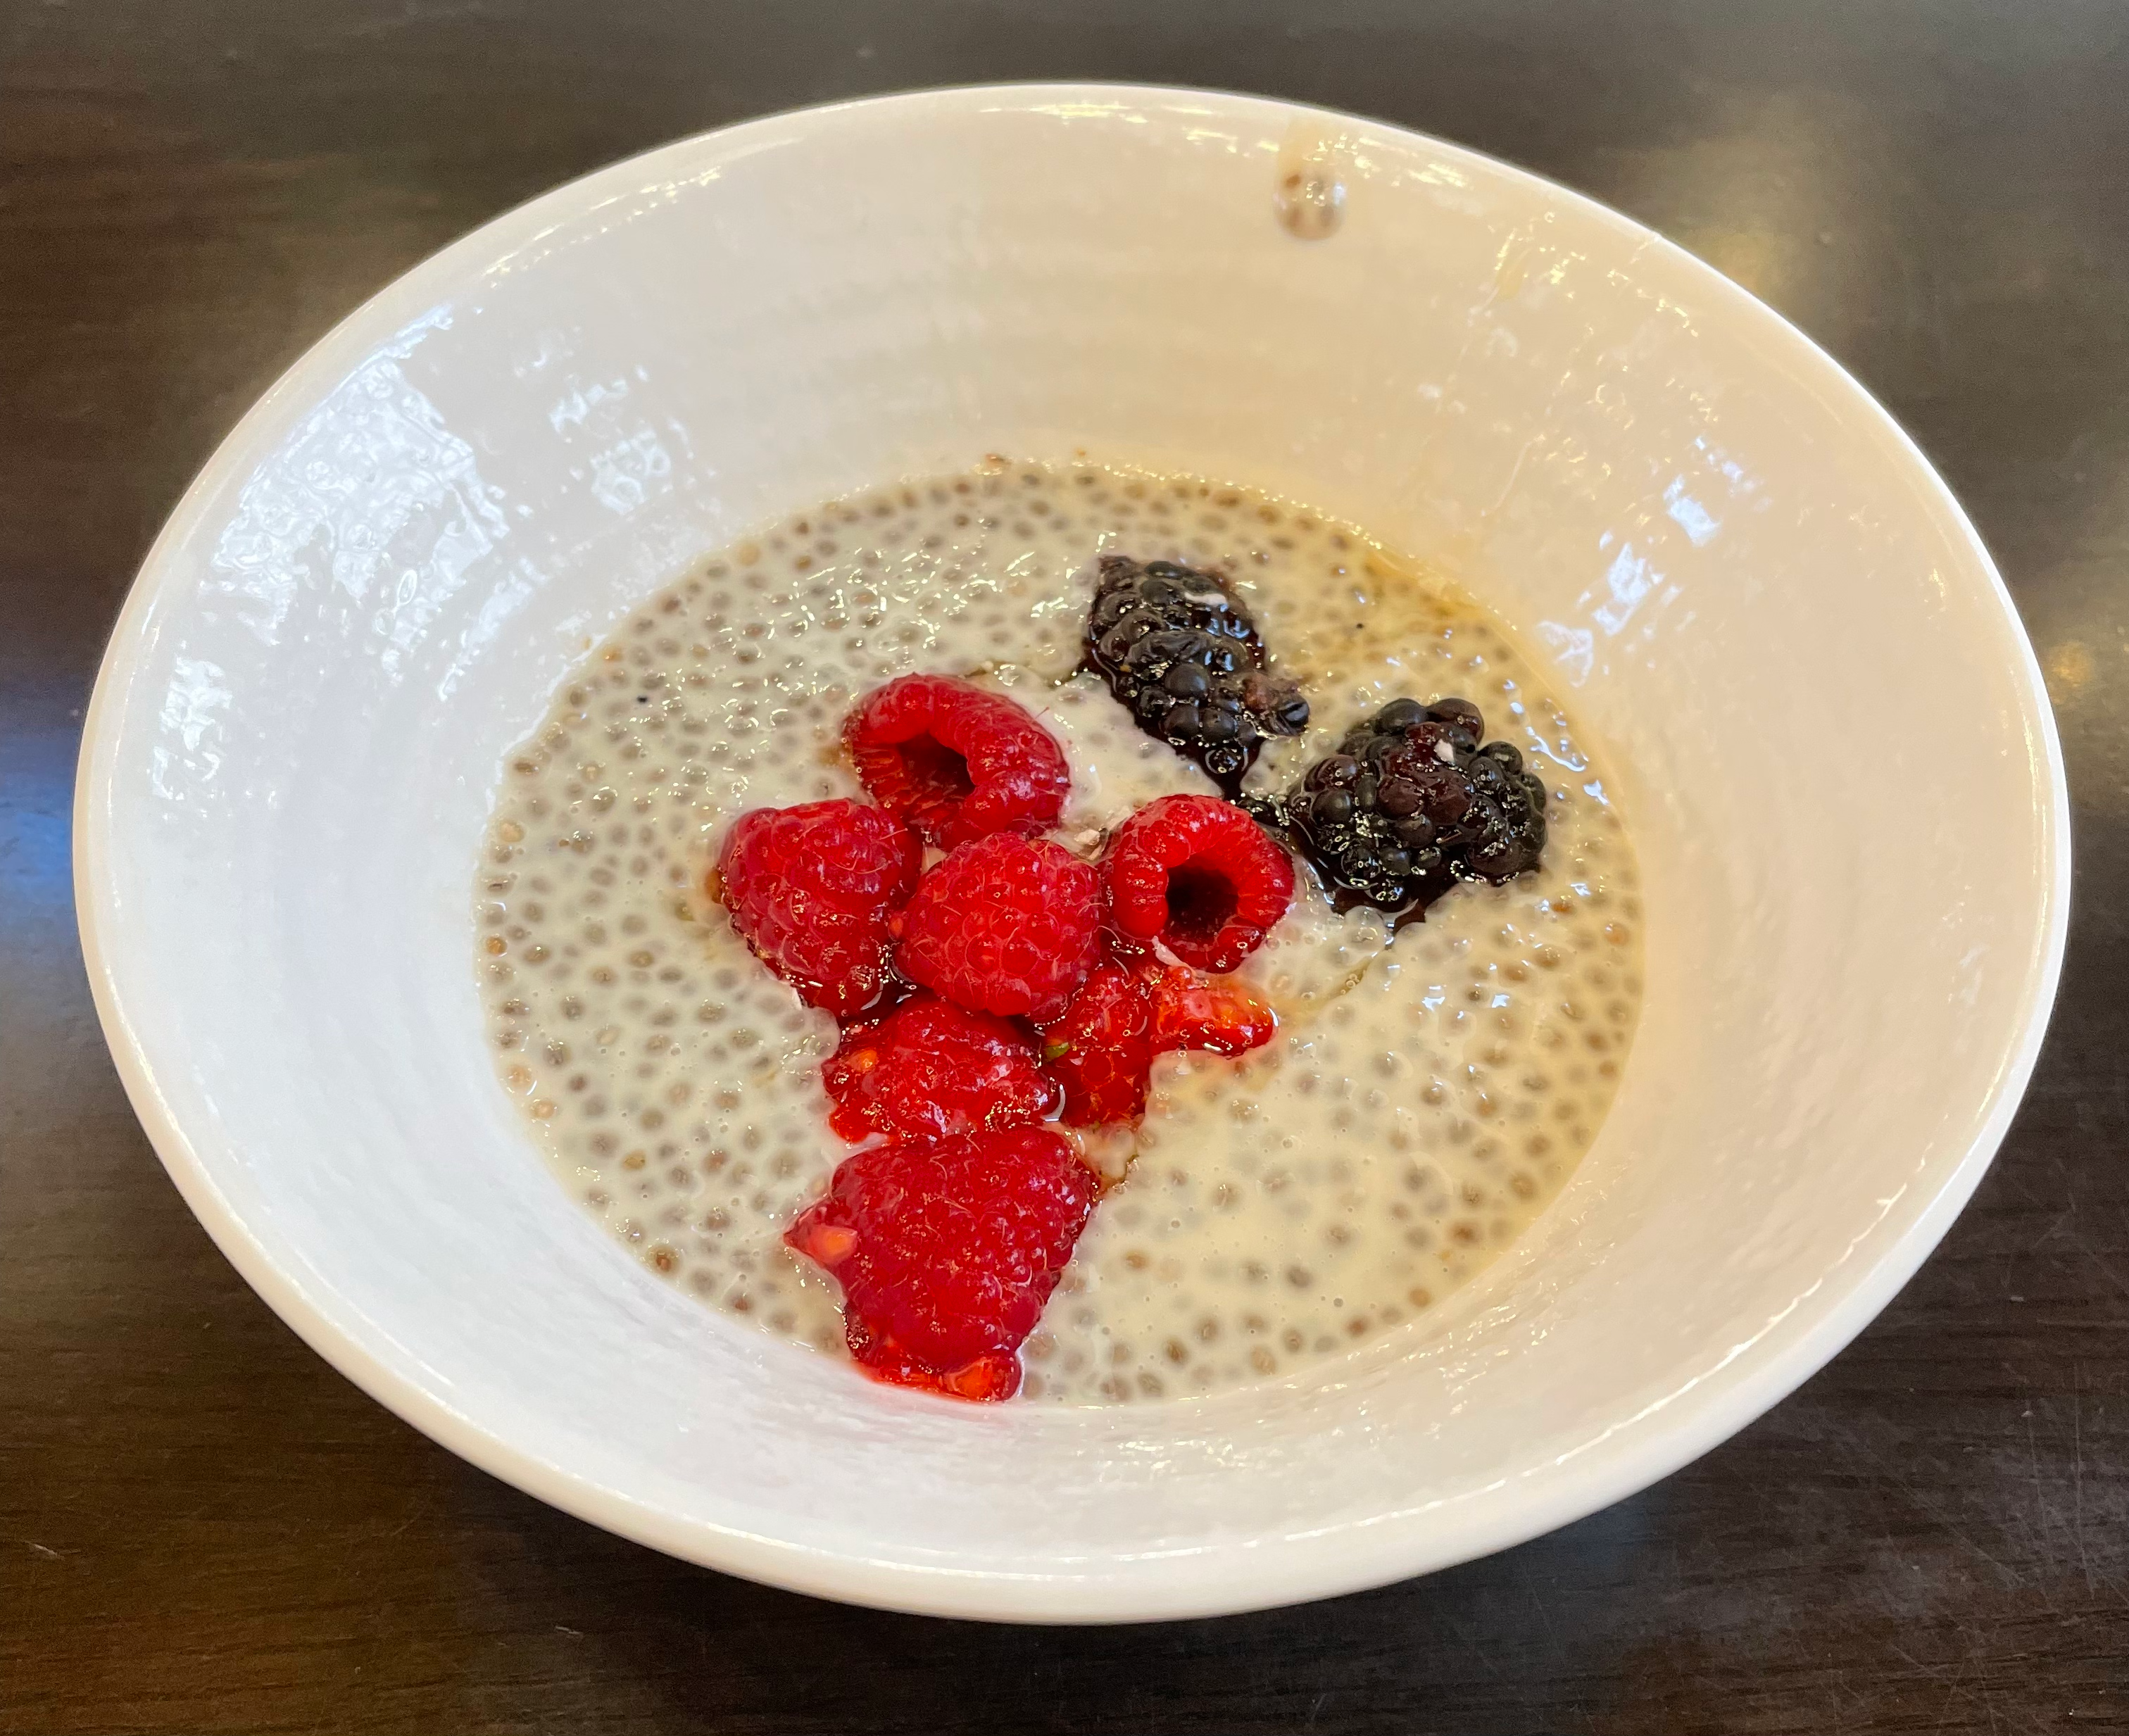 Chia seed pudding with raspberries and blackberries